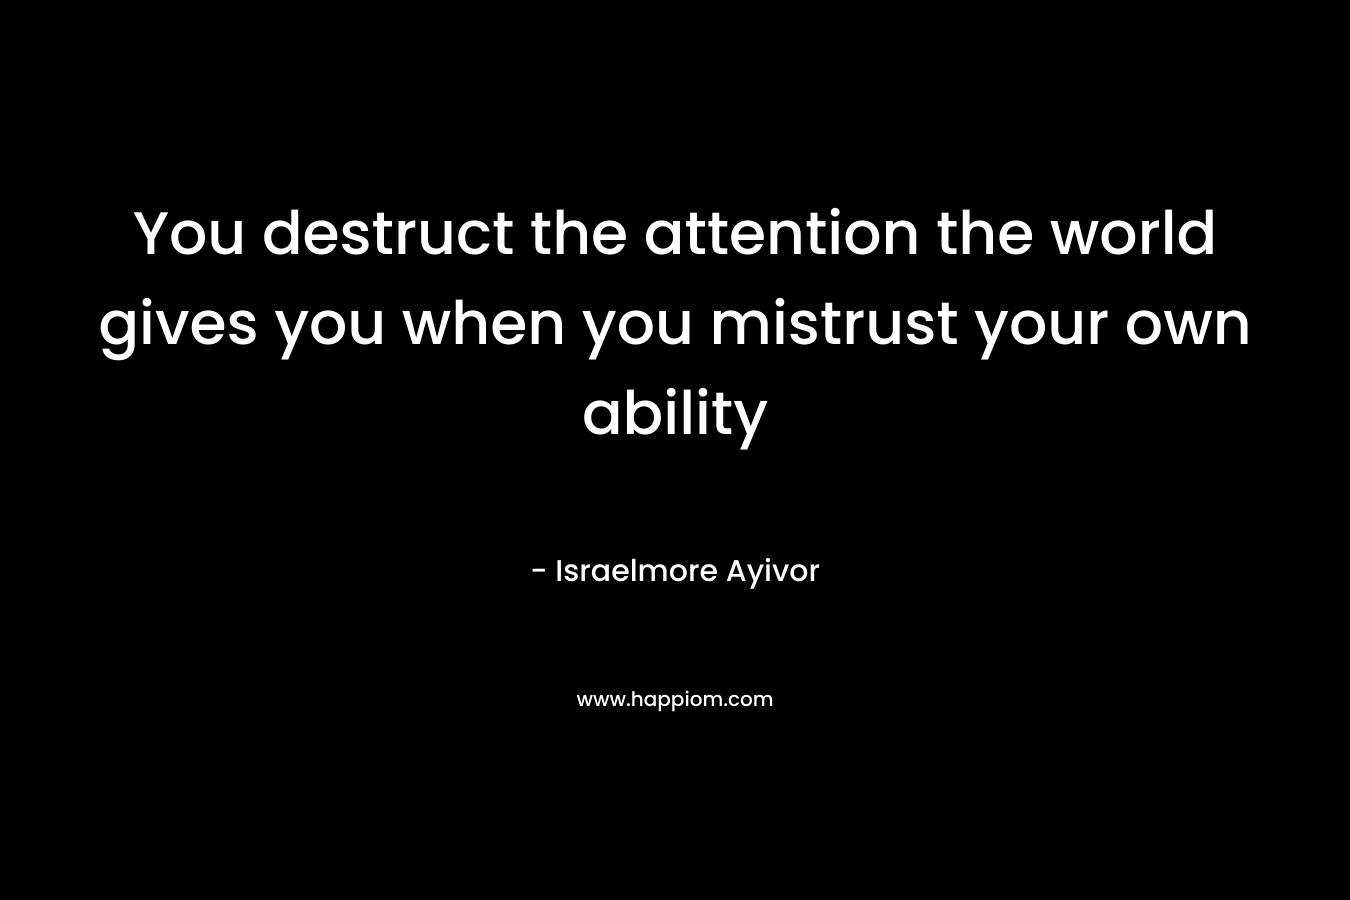 You destruct the attention the world gives you when you mistrust your own ability – Israelmore Ayivor